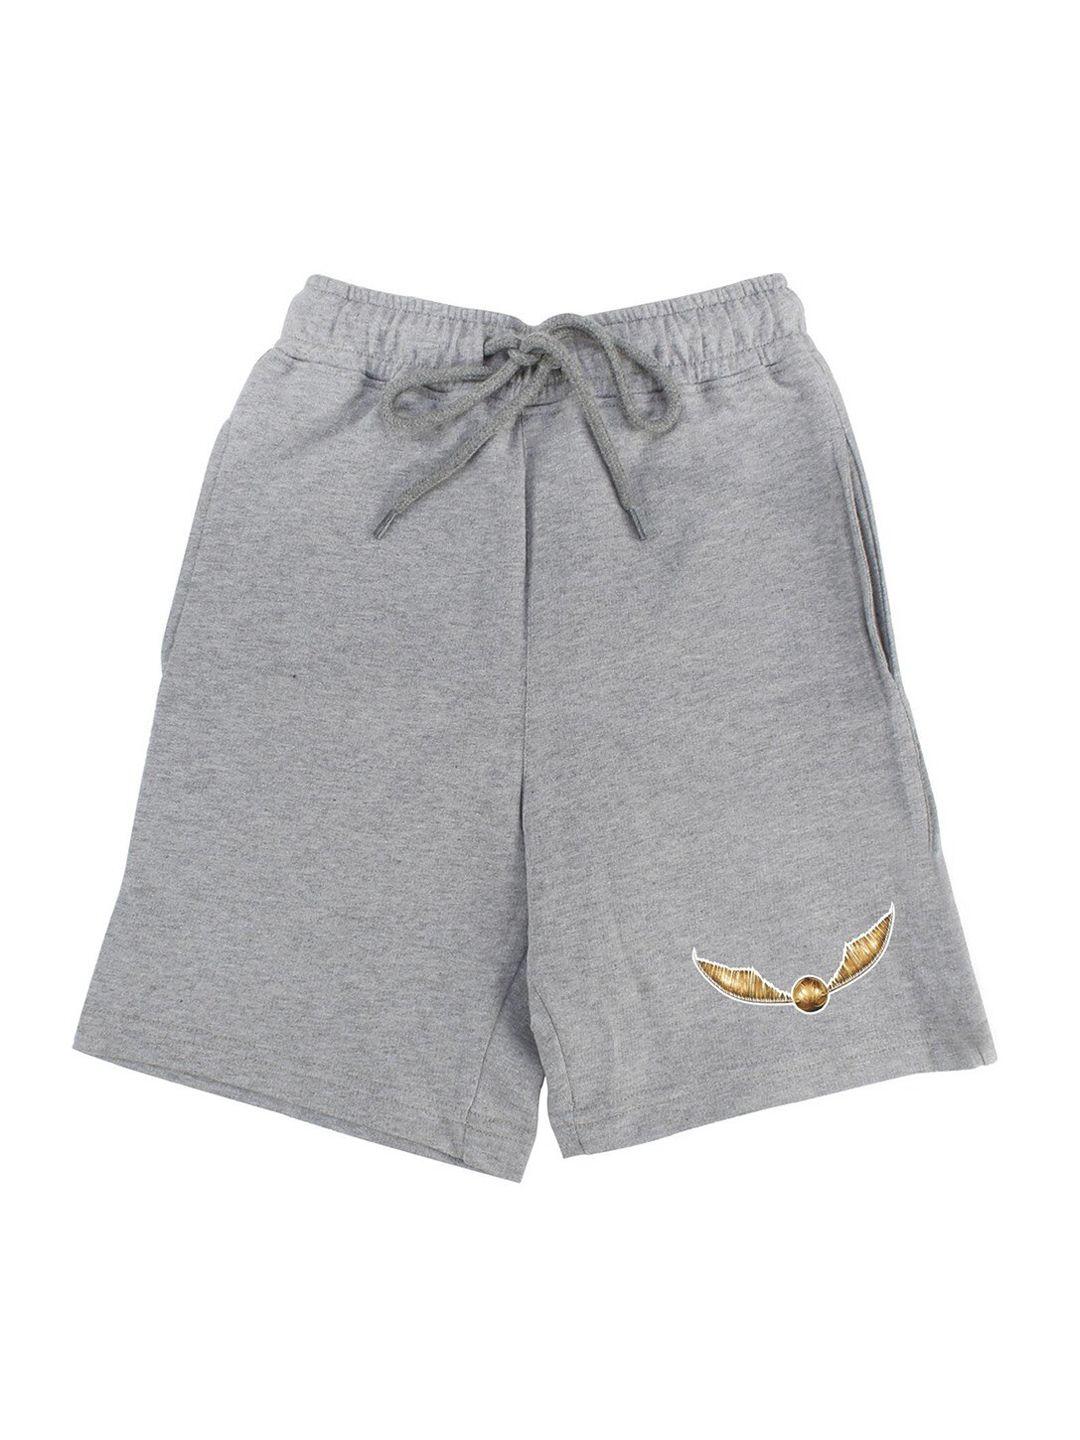 harry-potter-by-wear-your-mind-boys-grey-harry-potter-printed-shorts